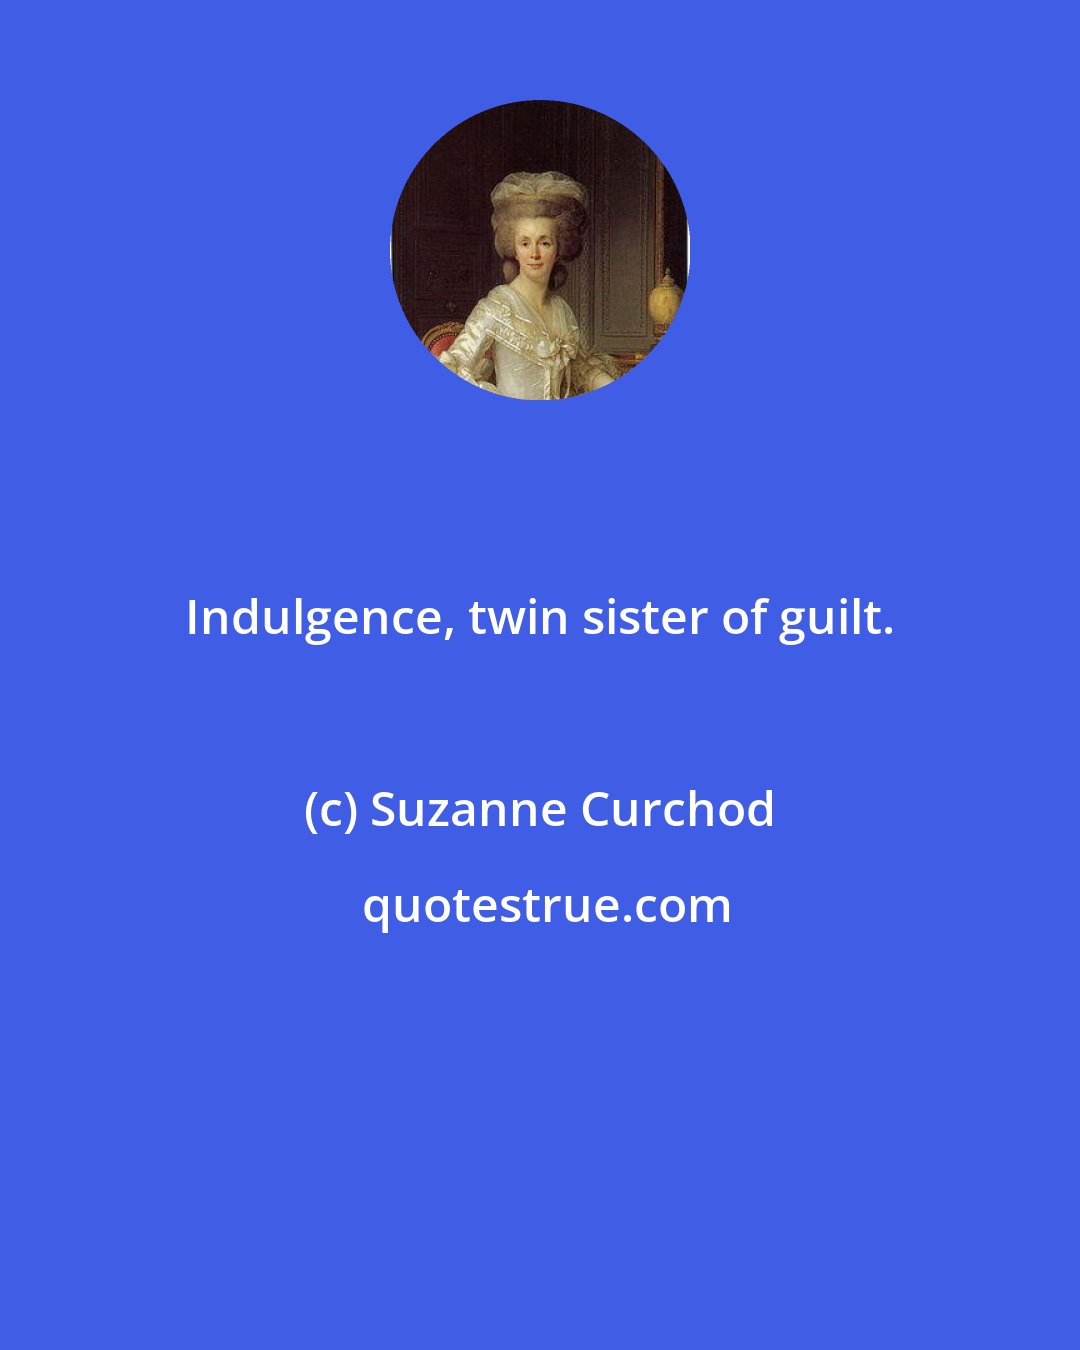 Suzanne Curchod: Indulgence, twin sister of guilt.